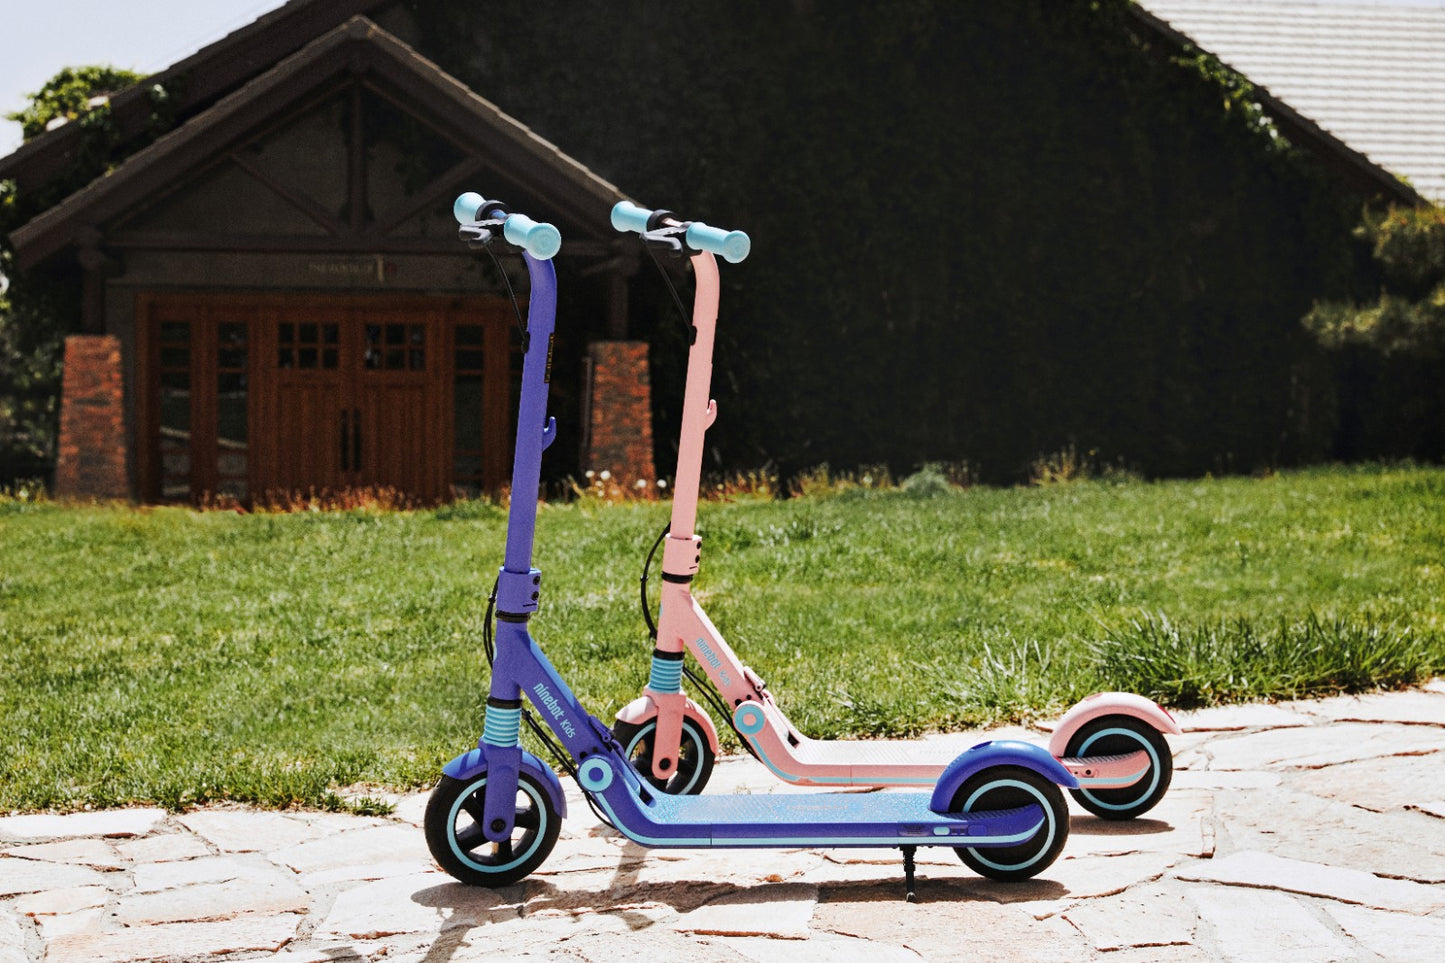 Segway Ninebot Zing E8 electric kickscooter for kids ages 6 to 12 years old. Comes in two colours blue and pink. Safe and easy to ride. Foldable and portable. Outside on the sidewalk on a sunny day.